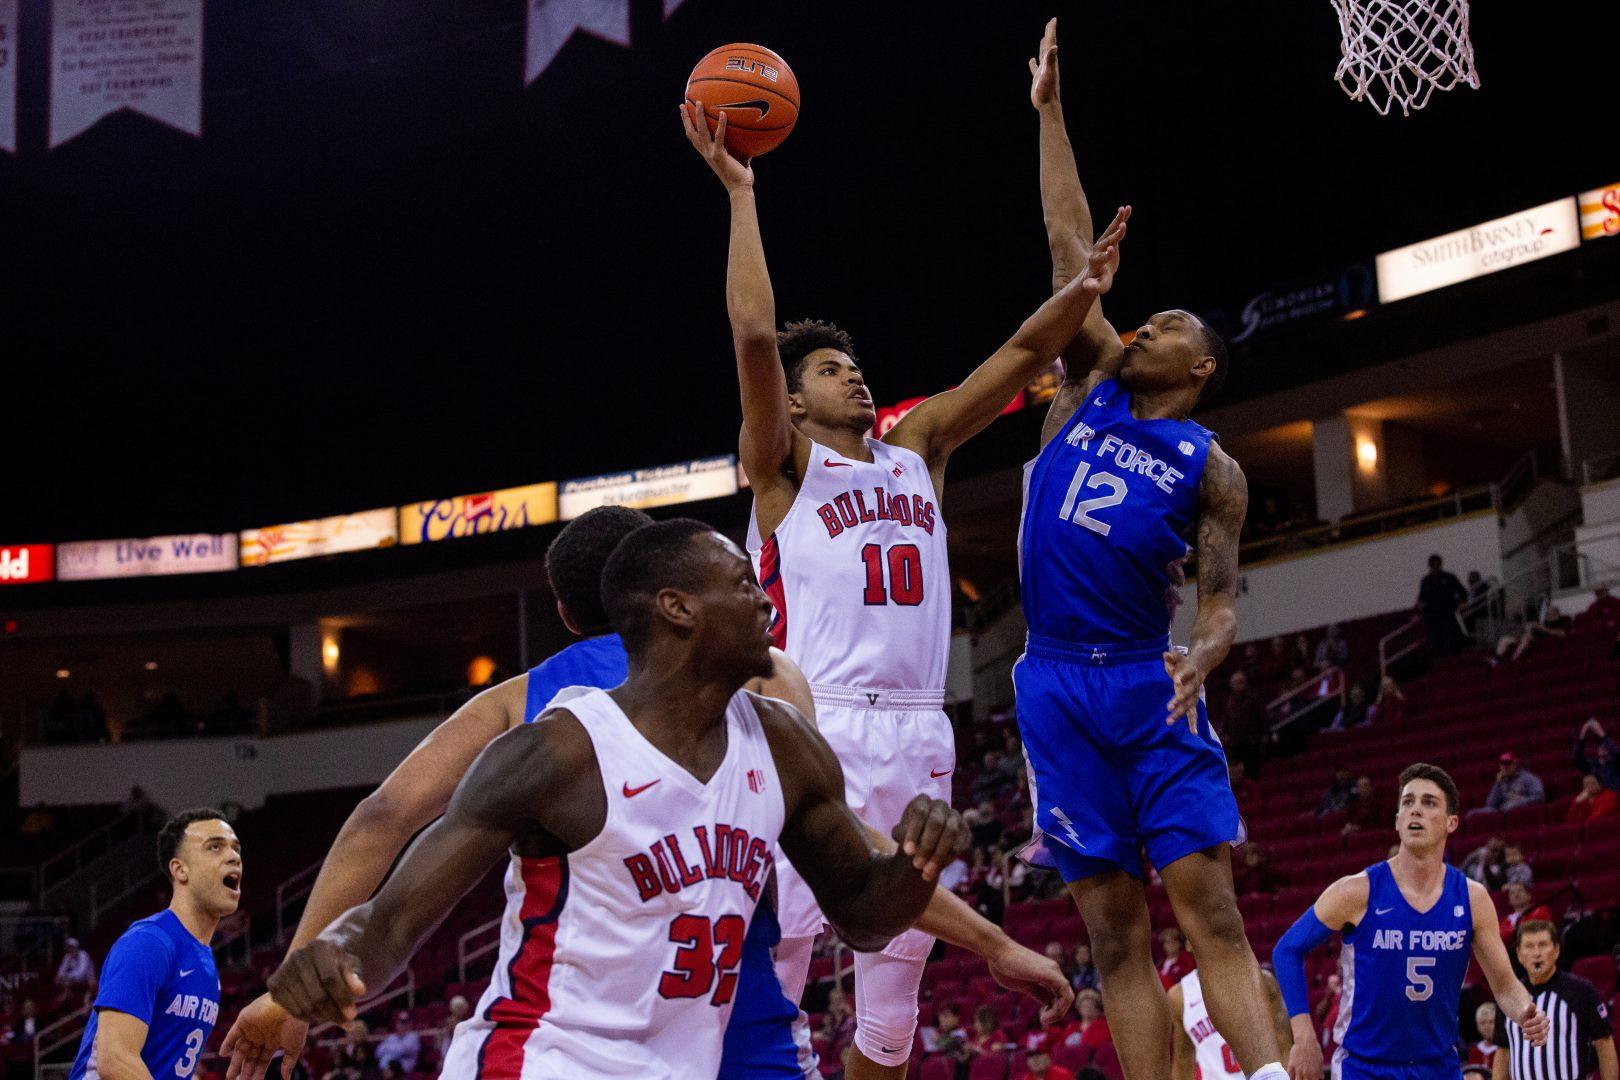 Orlando Robinson (10) shoots a field goal over Air Force defender Lavelle Scottie (12) in the first half at the Save Mart Center on Tuesday, Jan. 28. 2020. (Armando Carreno/The Collegian)